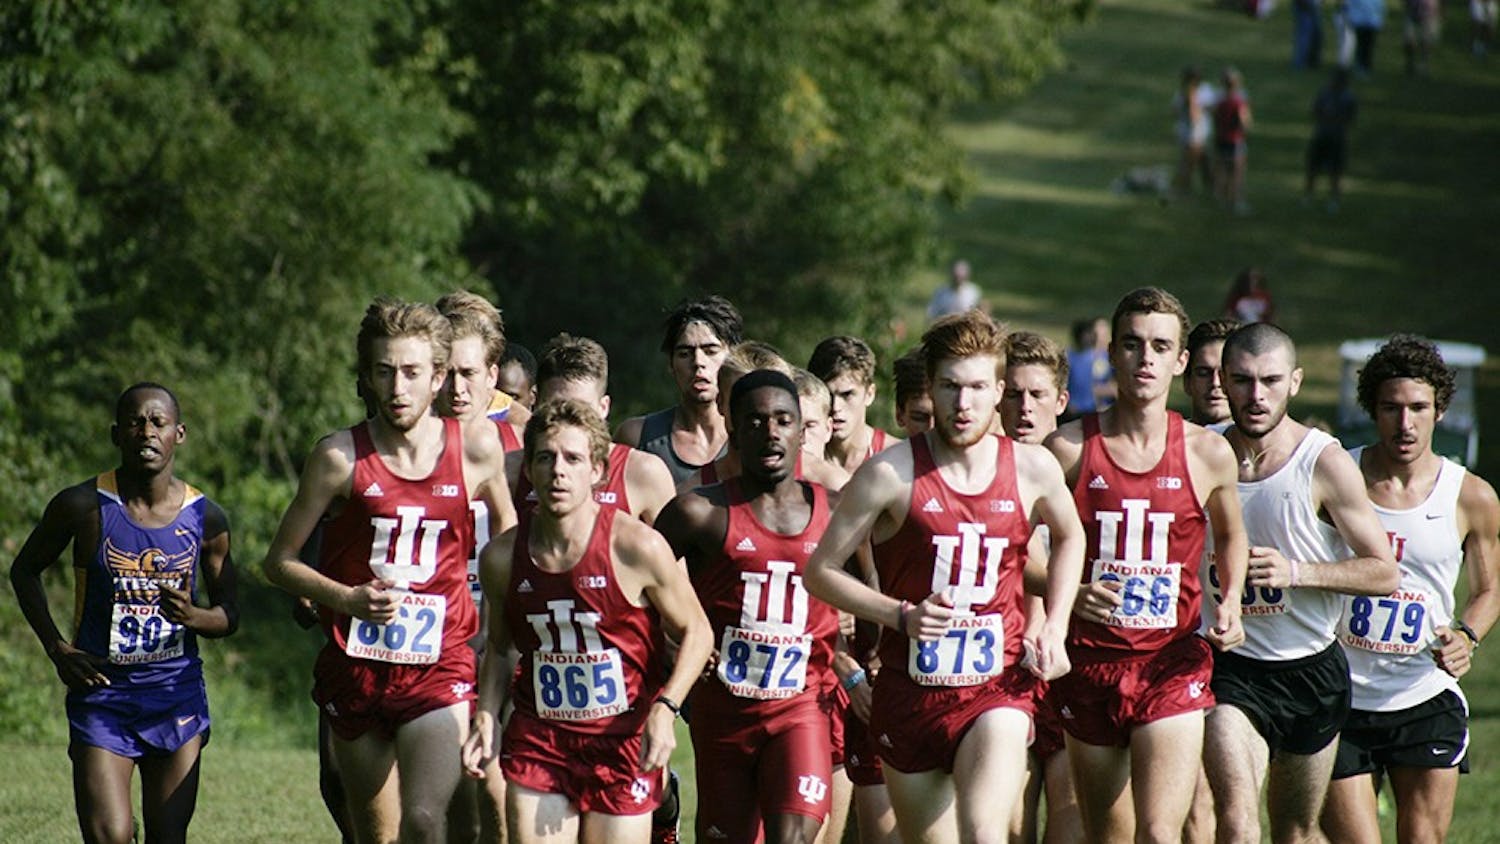 Members of the men's cross country team run up a hill during the Indiana Open on Sept. 5. Both the men's and women's teams won by large margins and allowed the runners to compete for the first time this season.